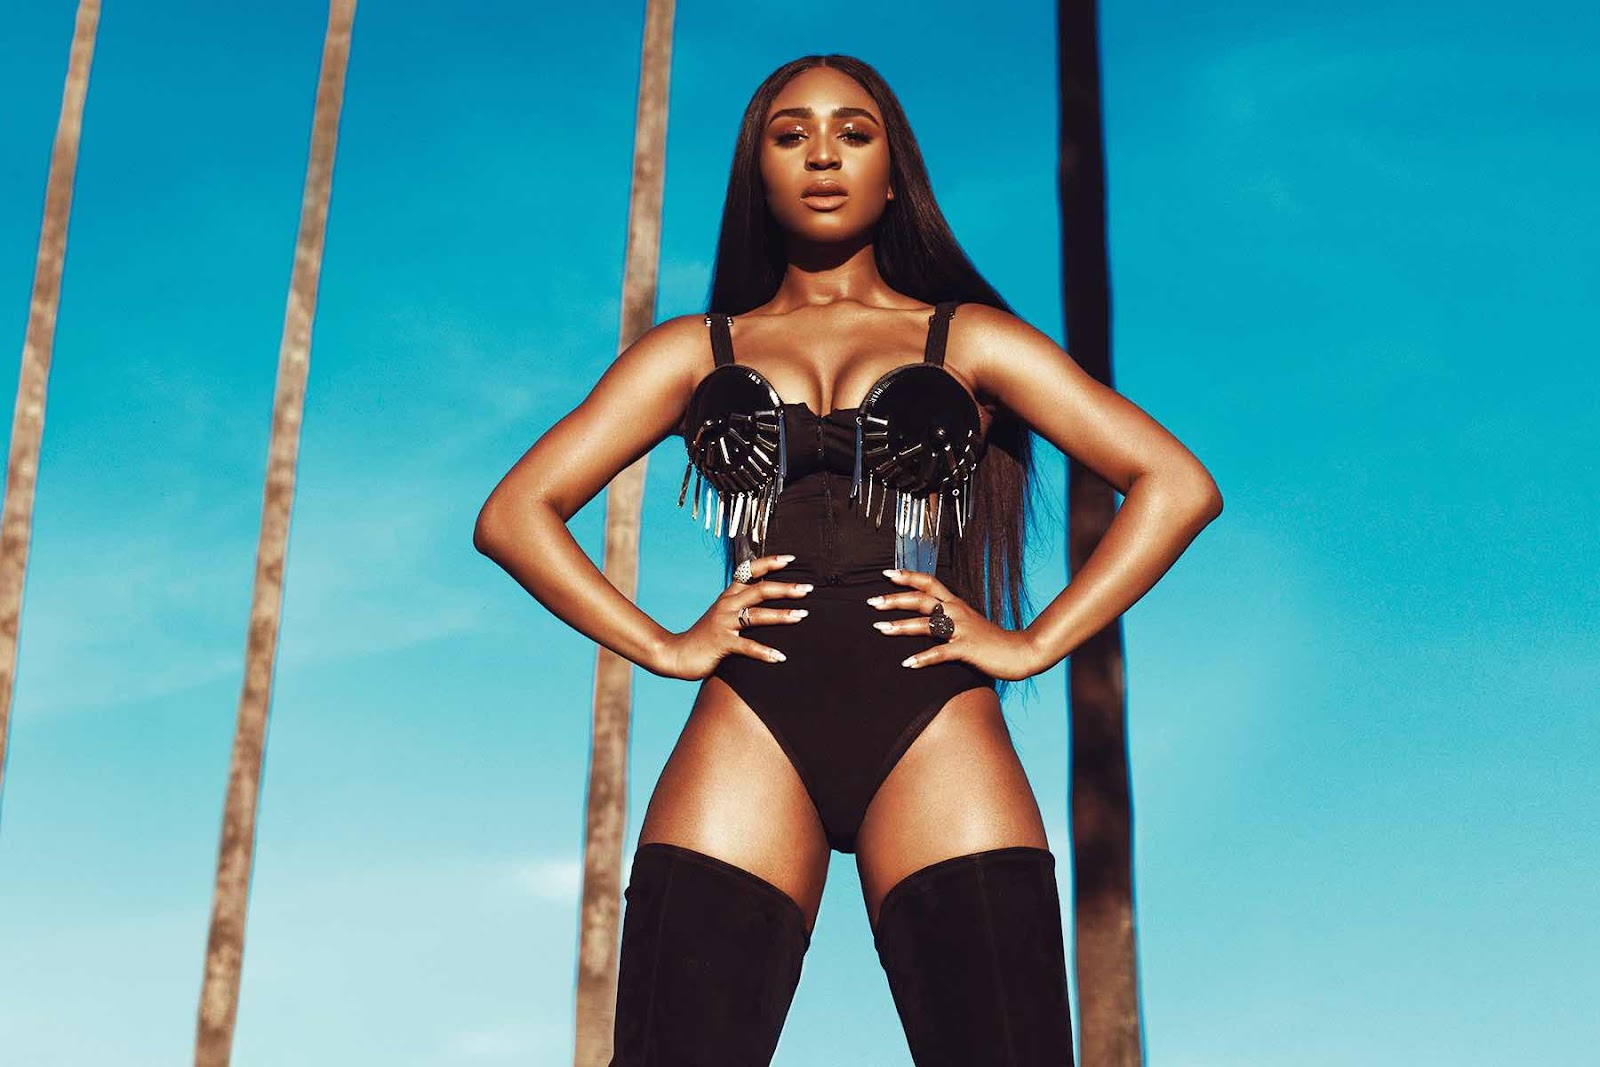 Will The Real Normani Please Stand Up?